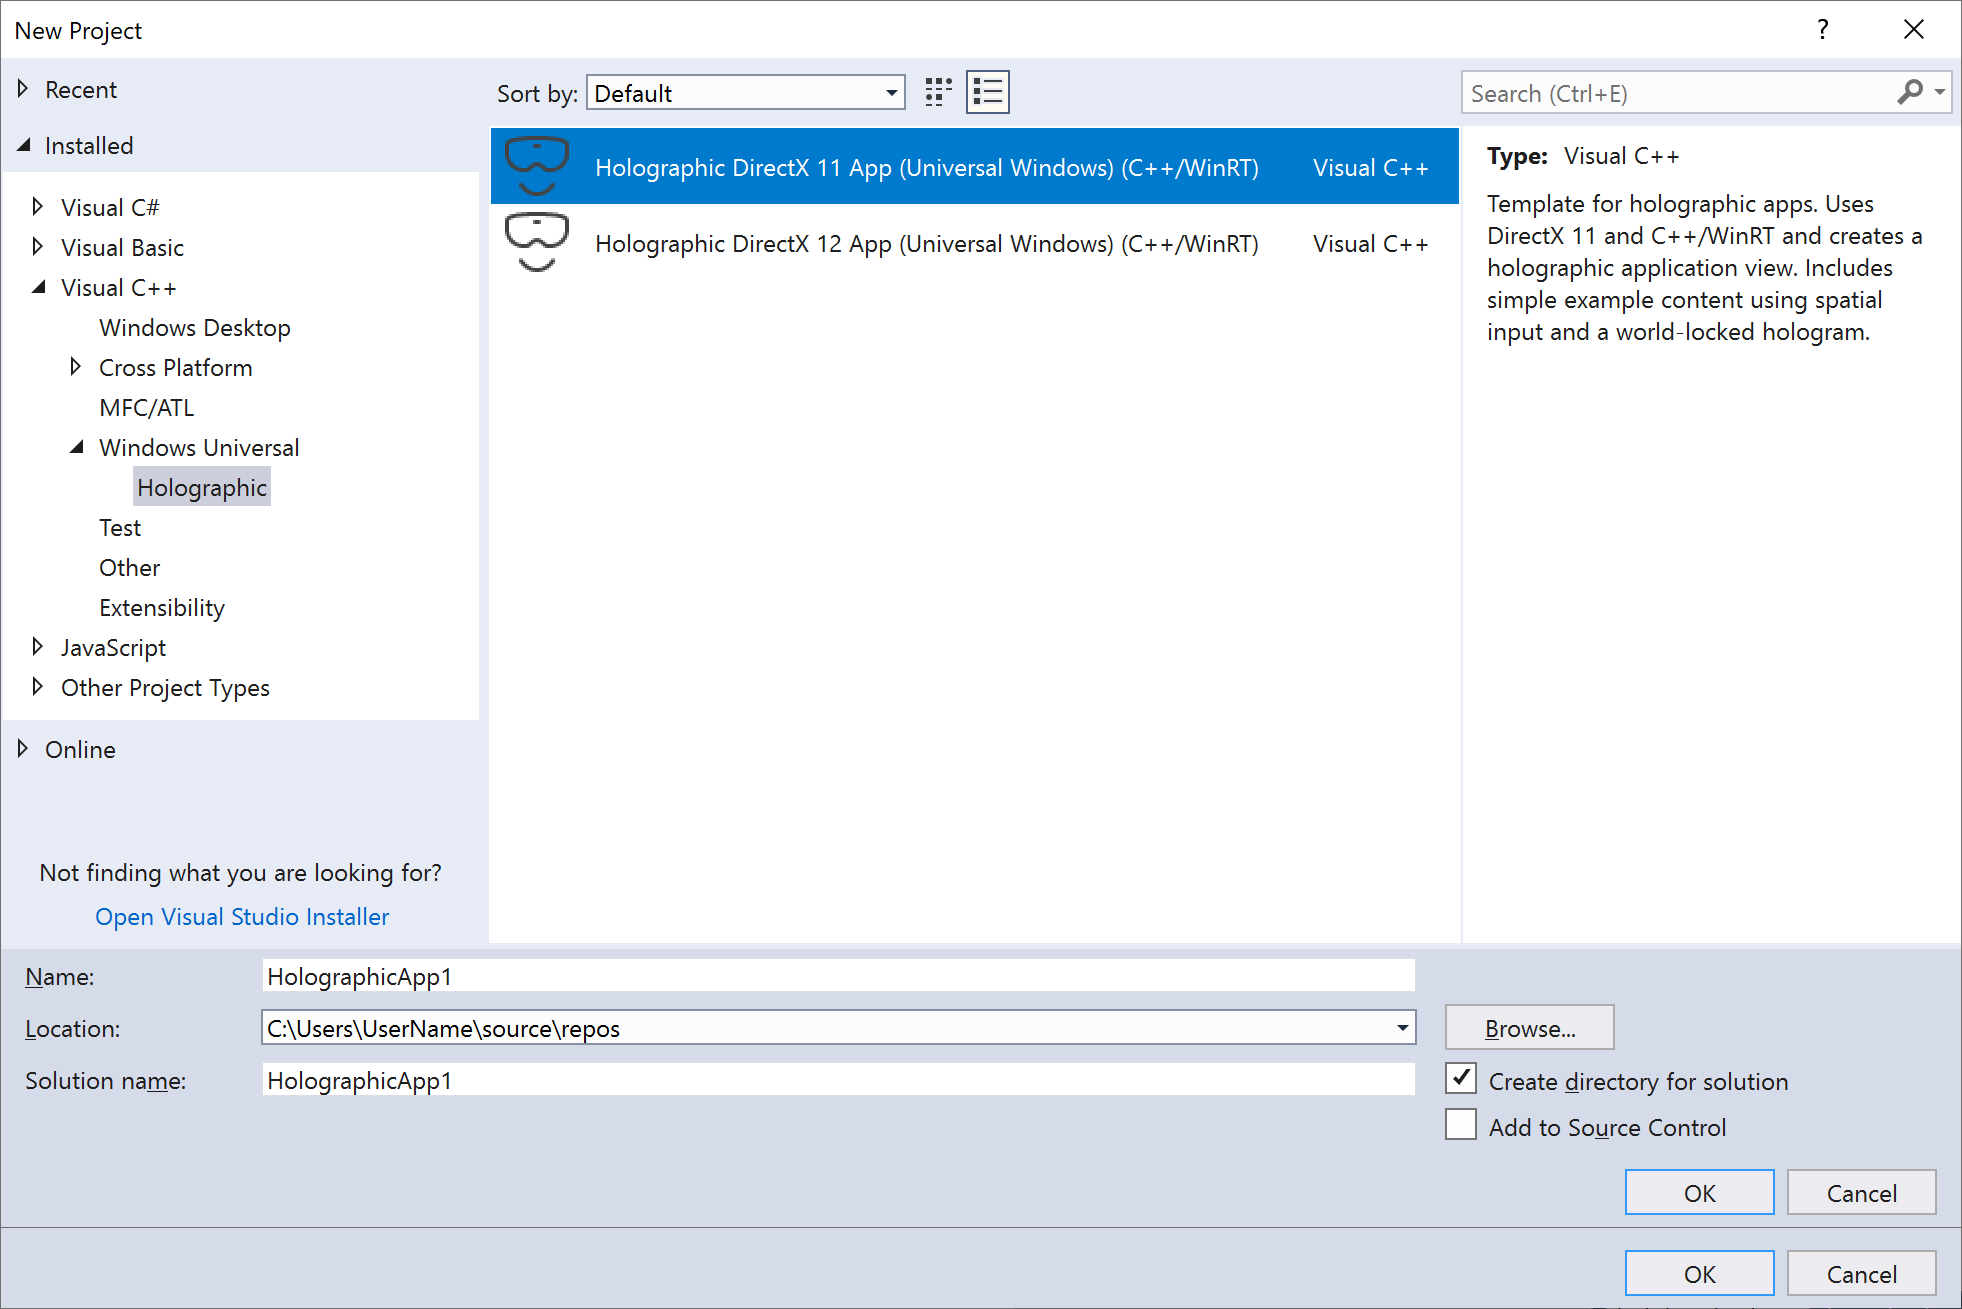 Screenshot of the Holographic DirectX 11 C++/WinRT UWP app project template in Visual Studio 2017